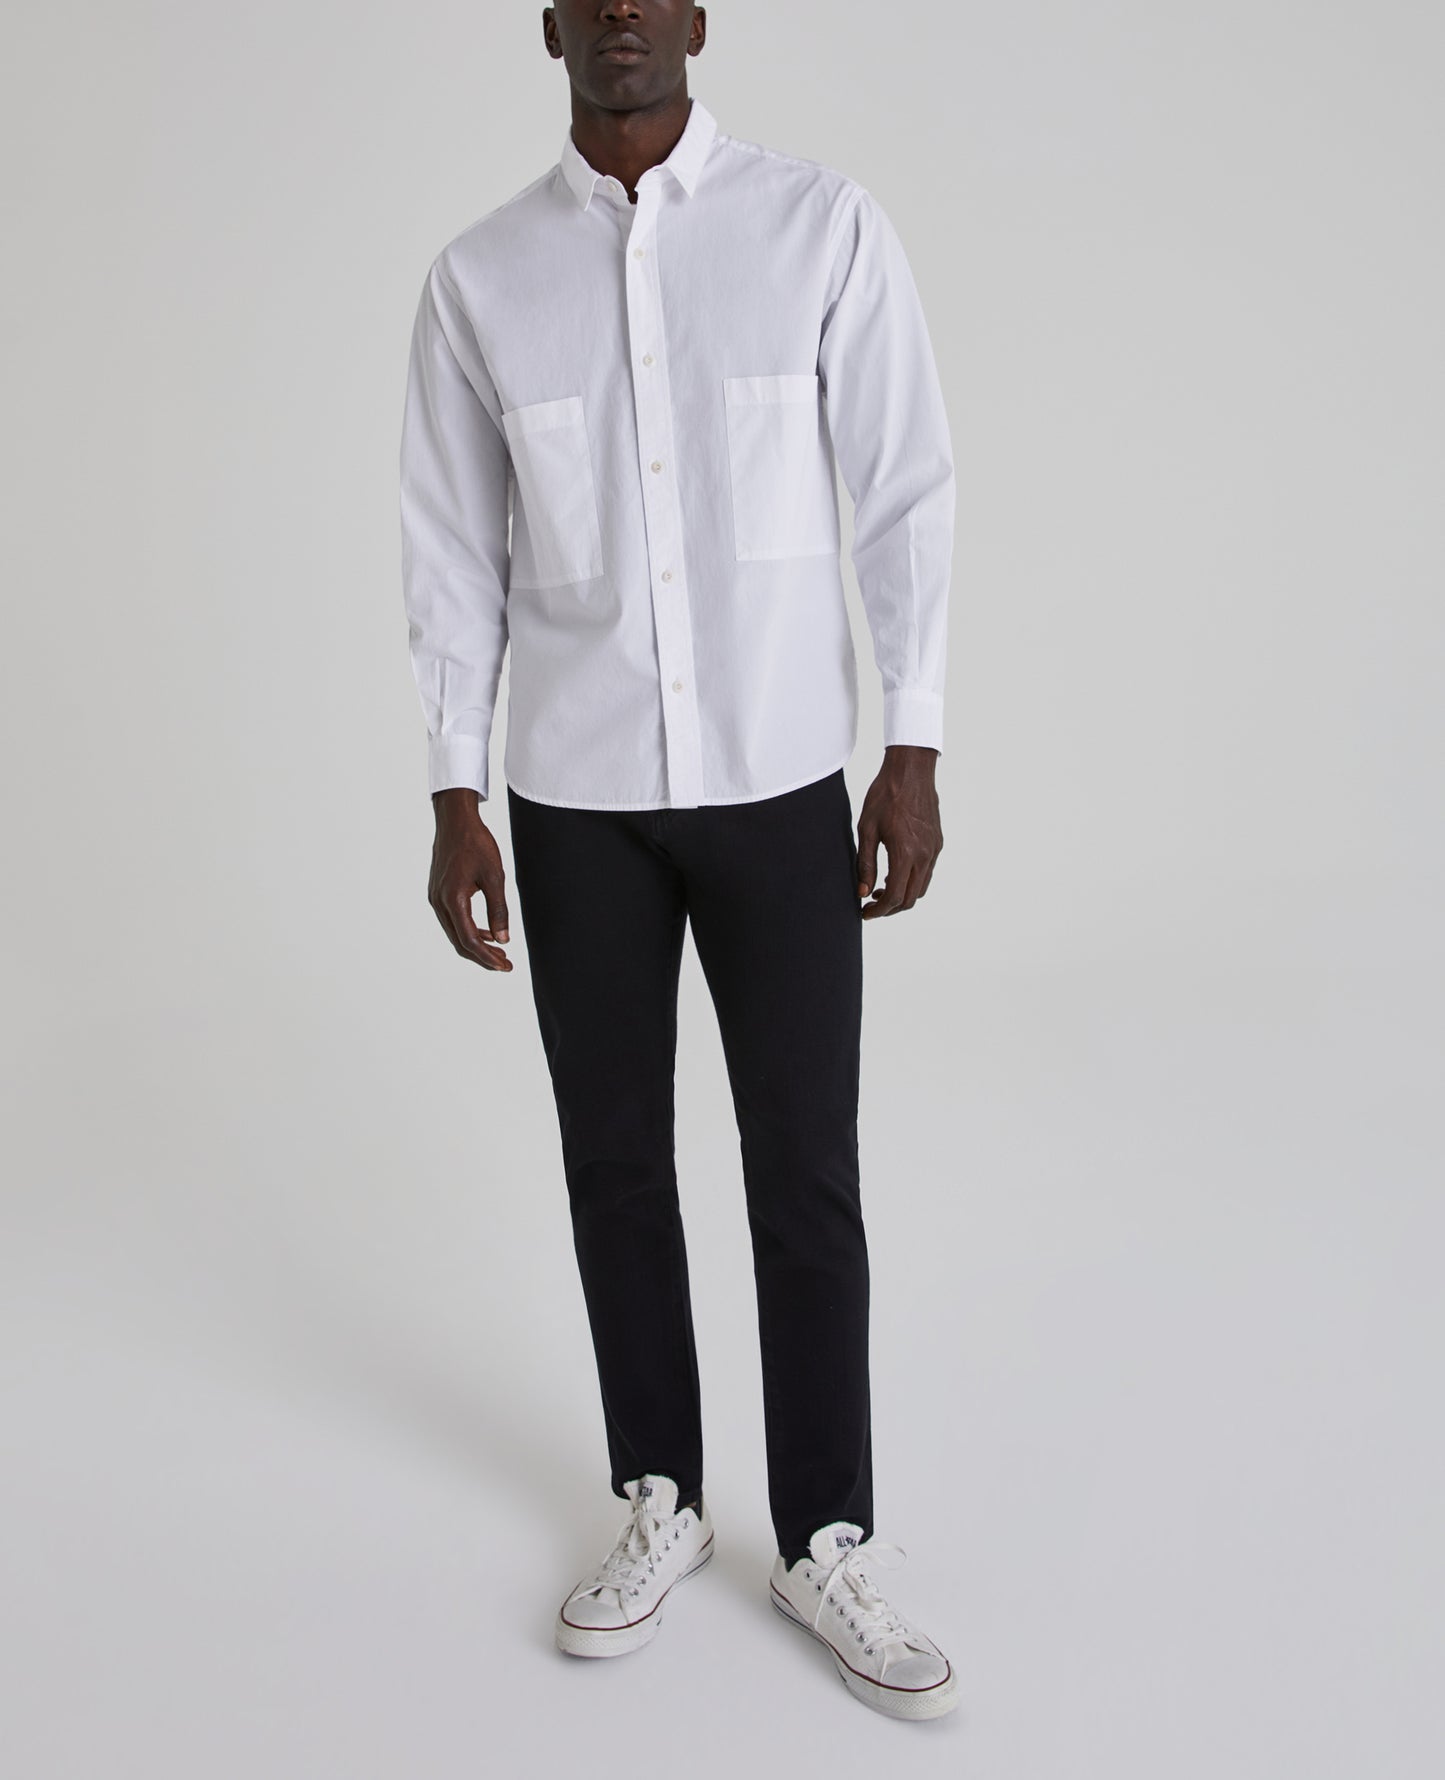 H&M oversized white button down shirt with AG jeans stilt crop